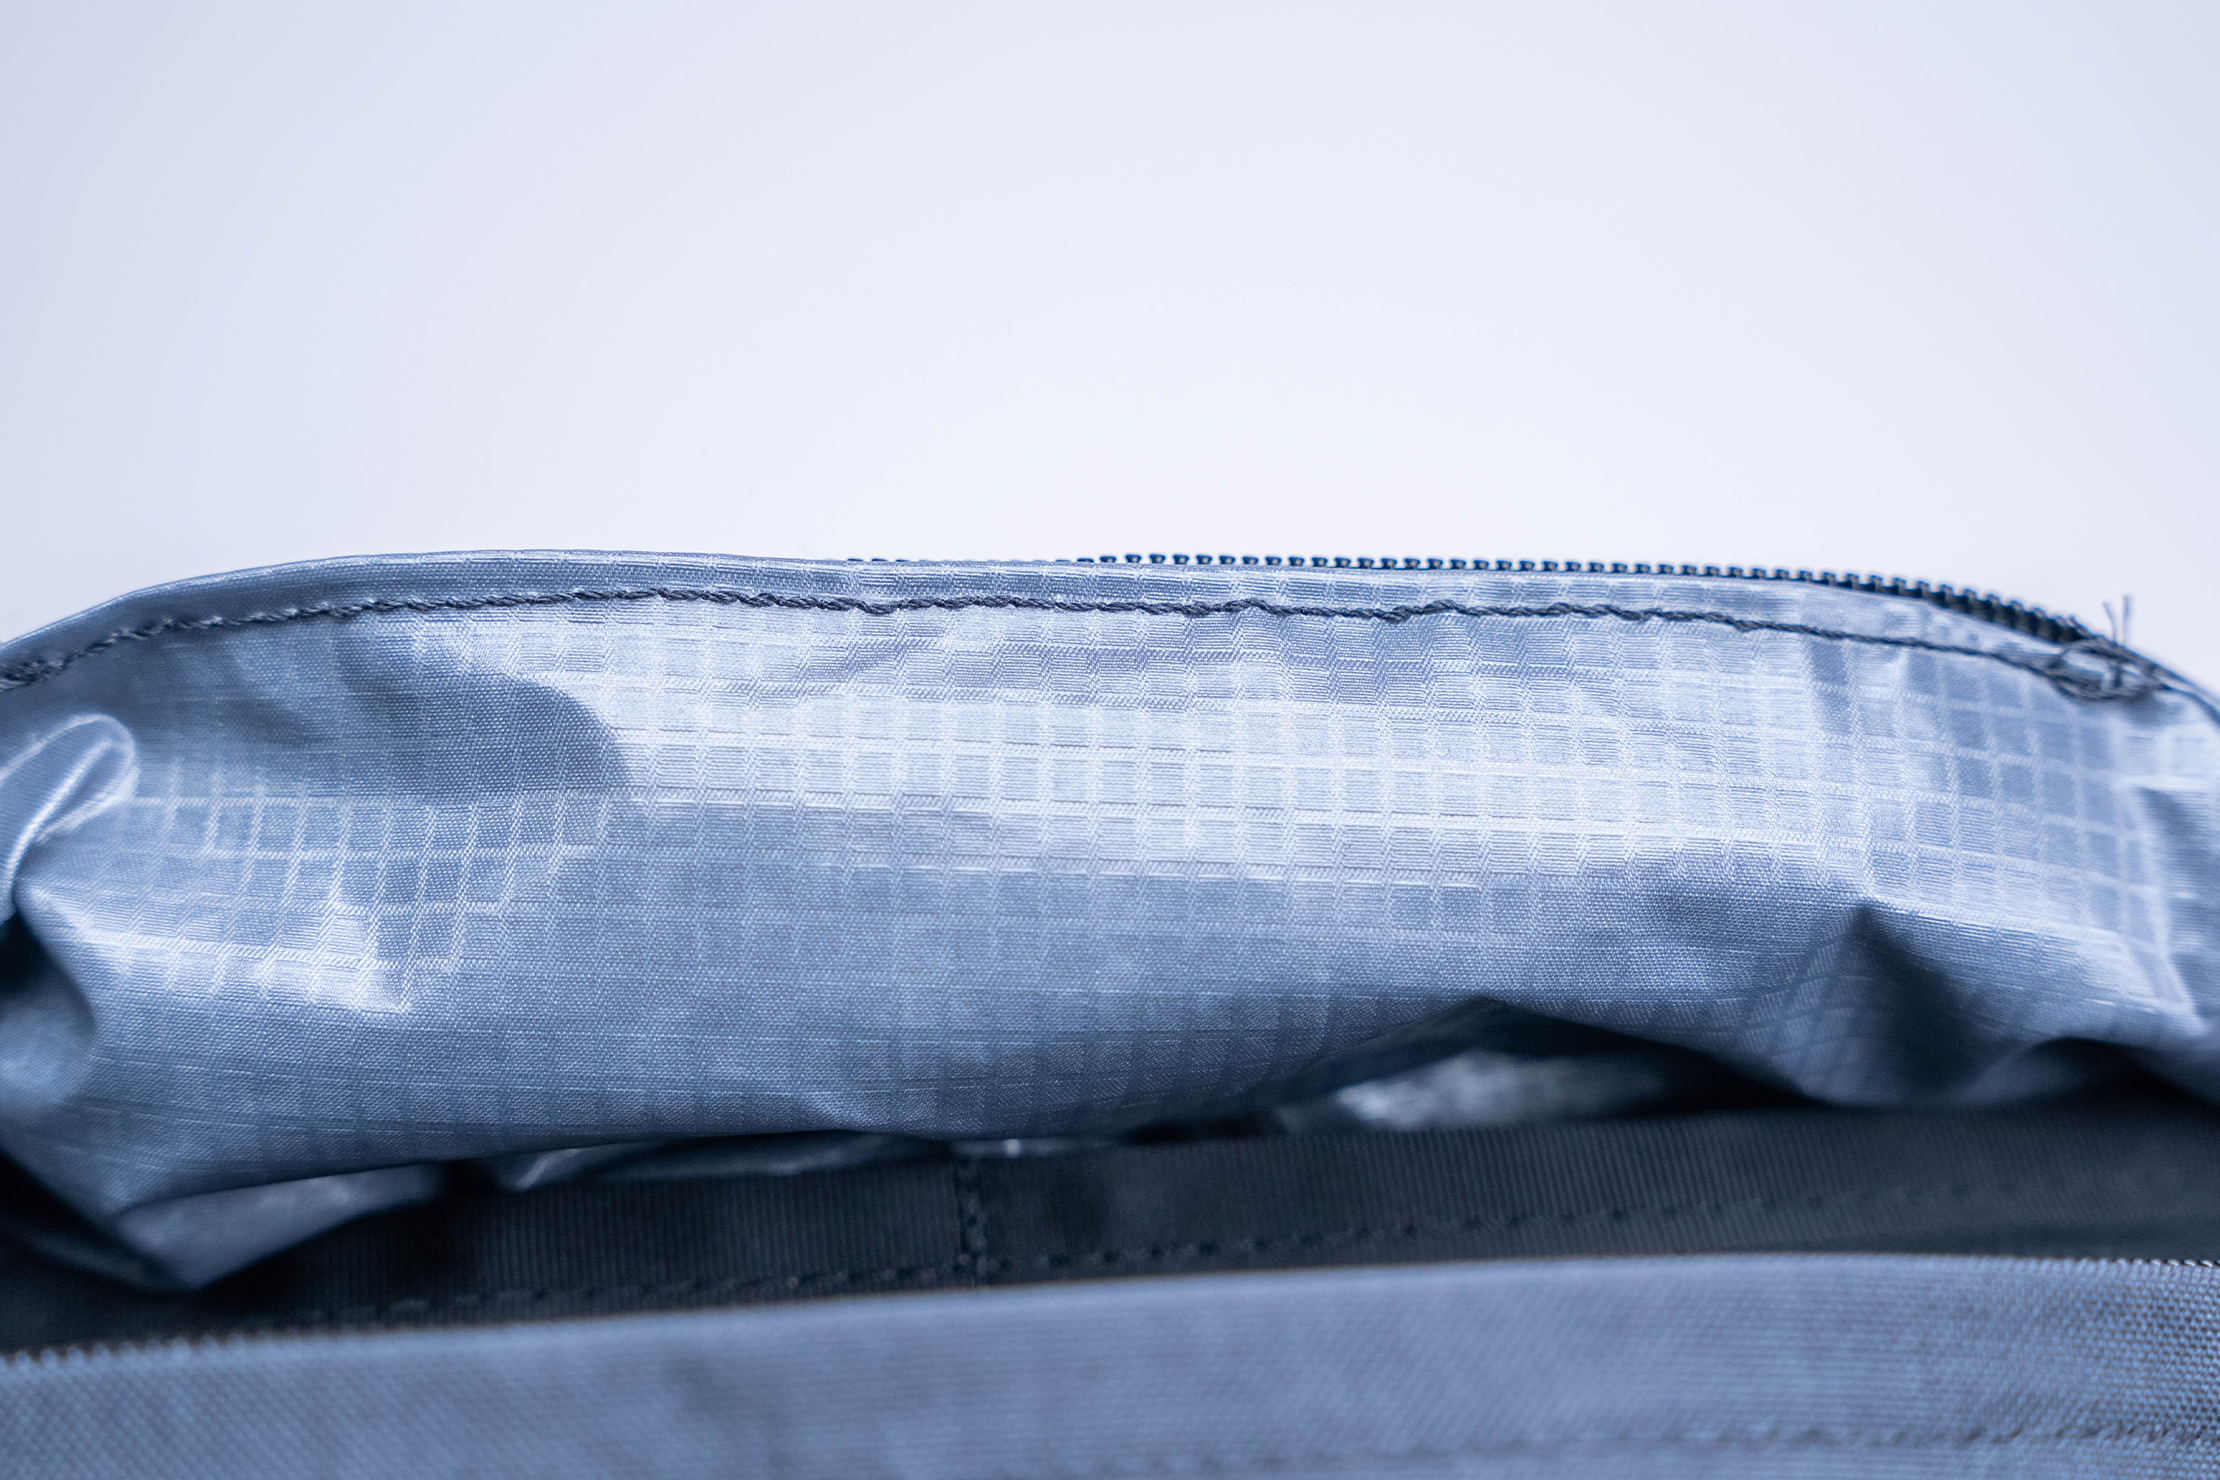 Mission Workshop Axis Modular Waist Pack Material